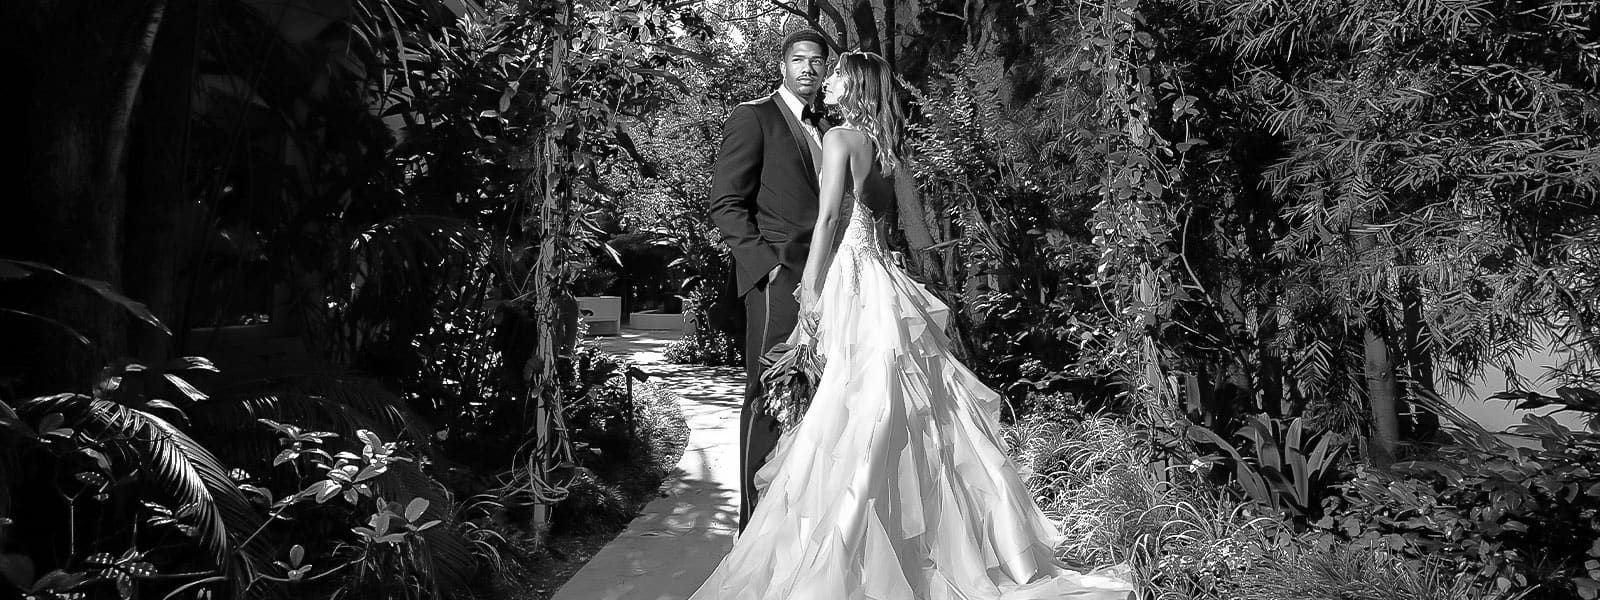 Wedding RFP Hero - Couple in the Gardens in Black and White